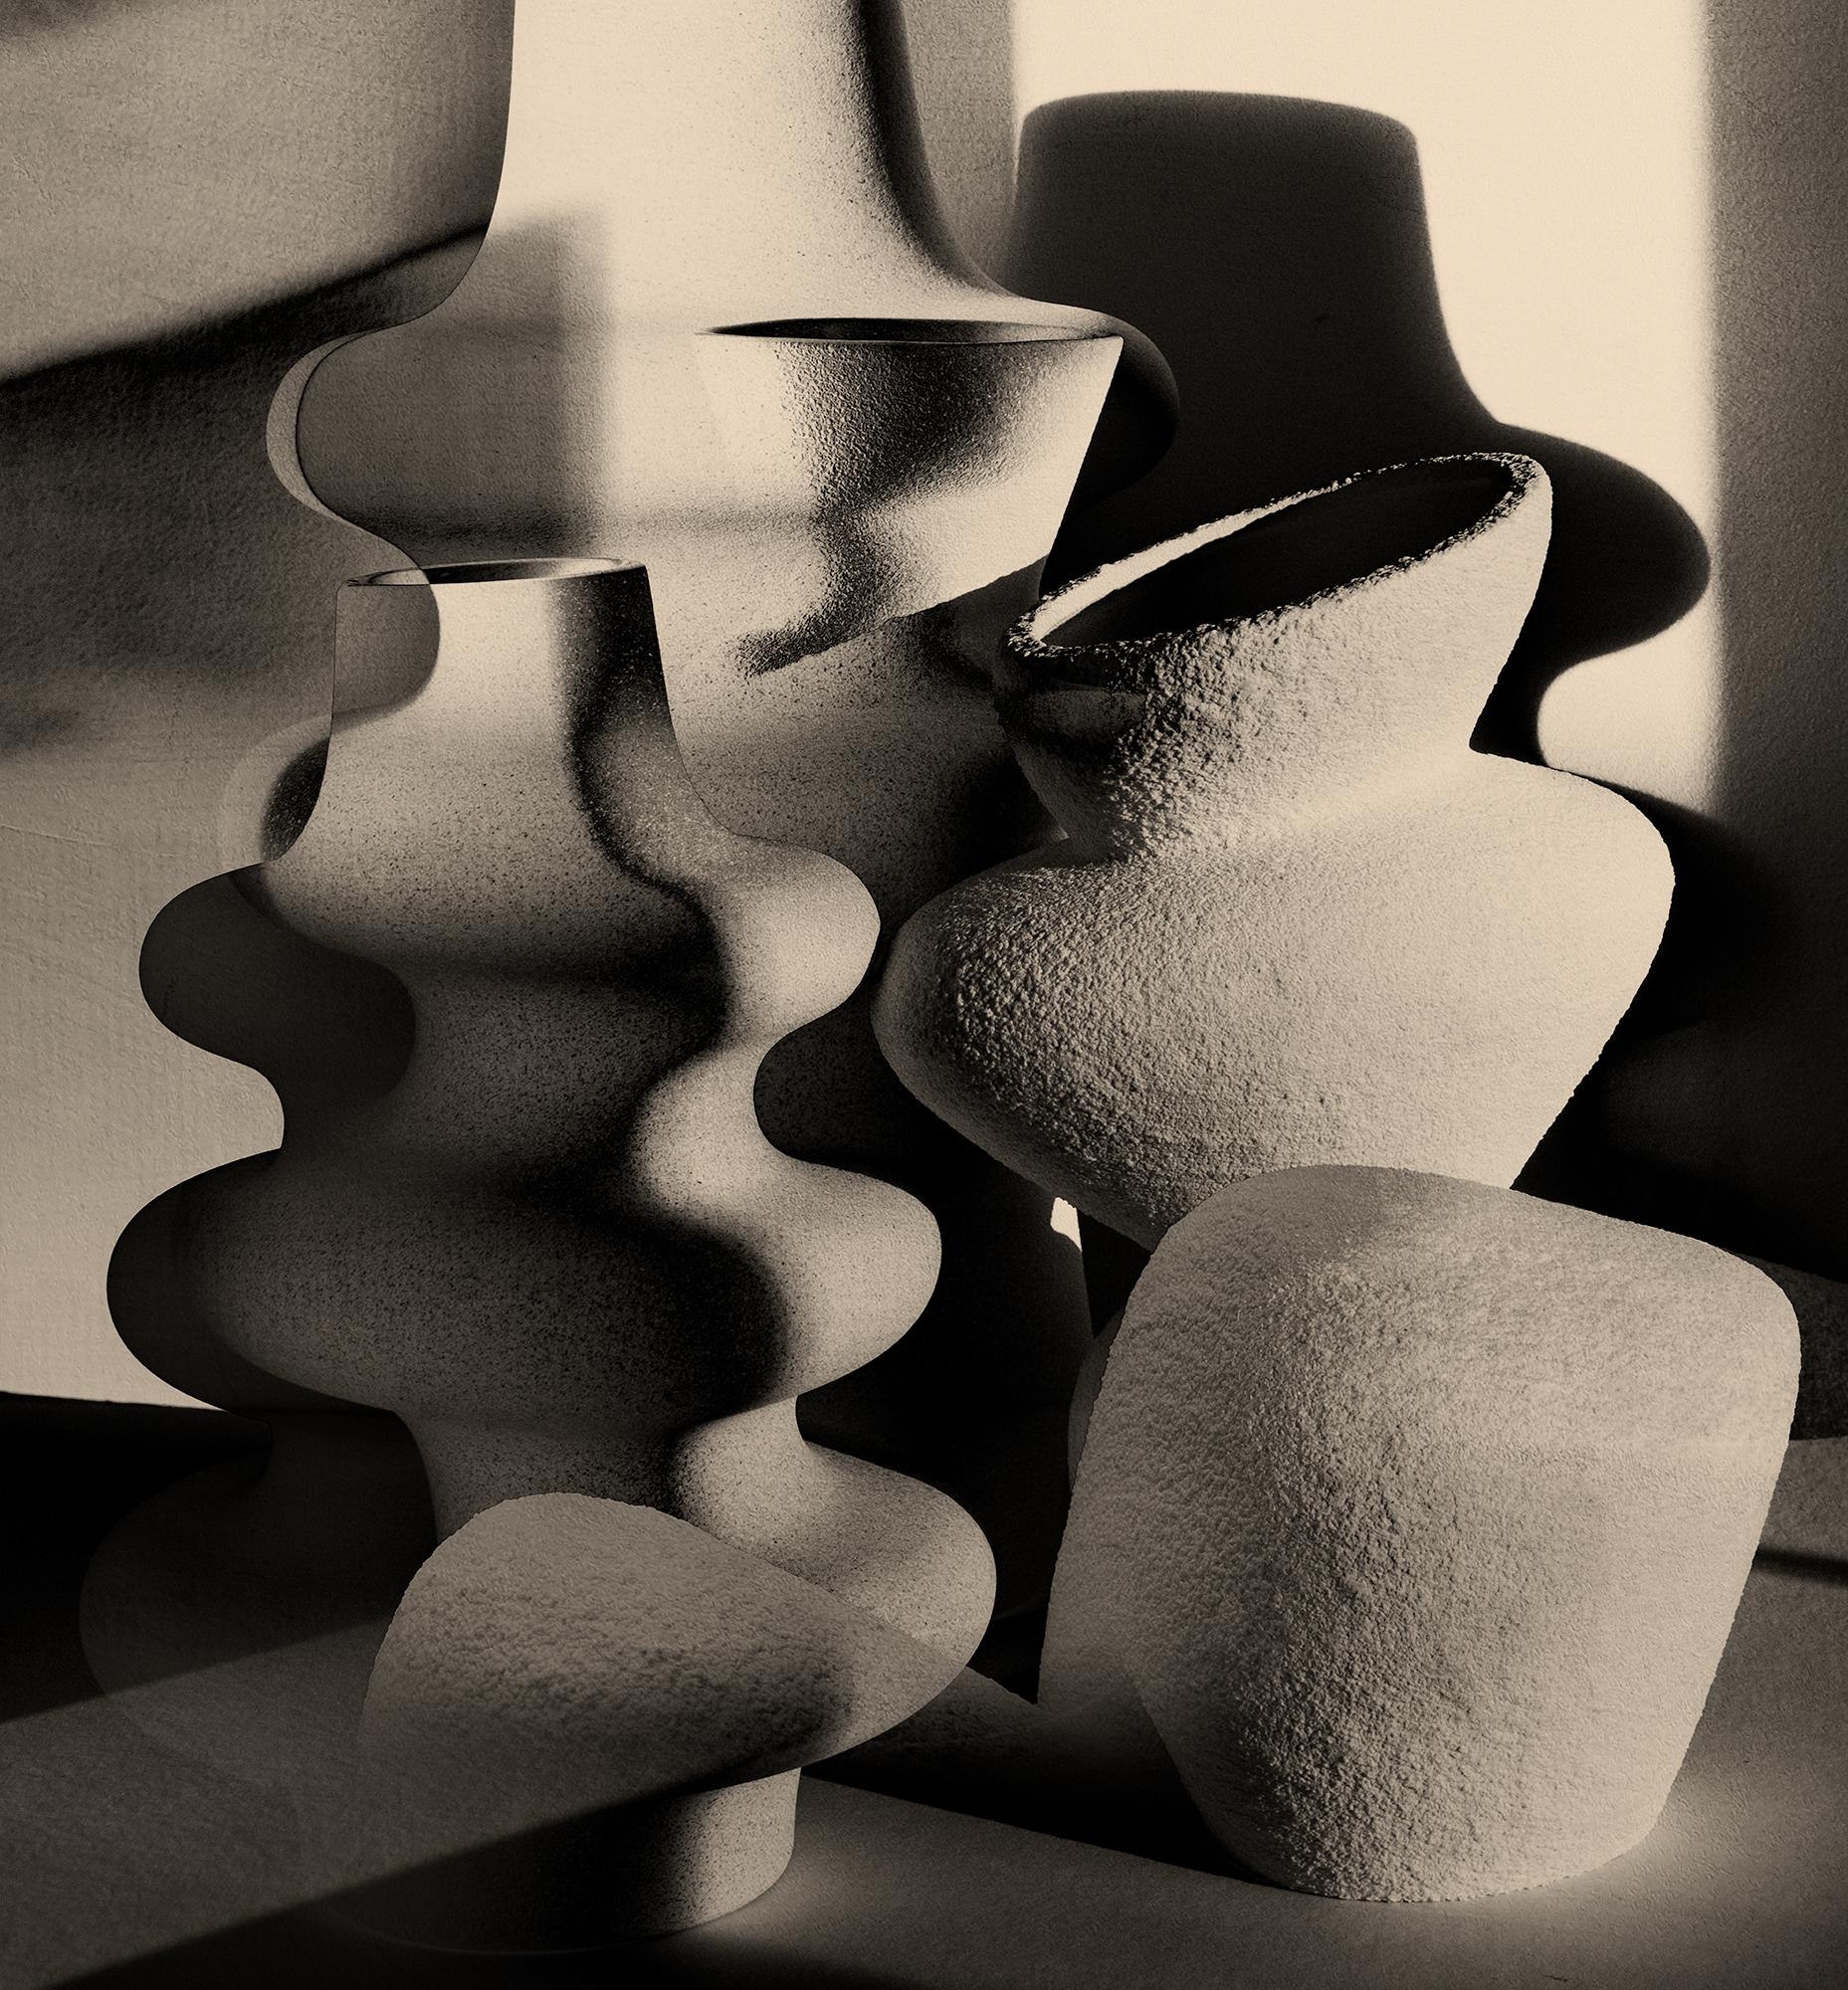 Abstract Photograph Sander Vos - In Between the Shadows n°6, impression couleur Sepia